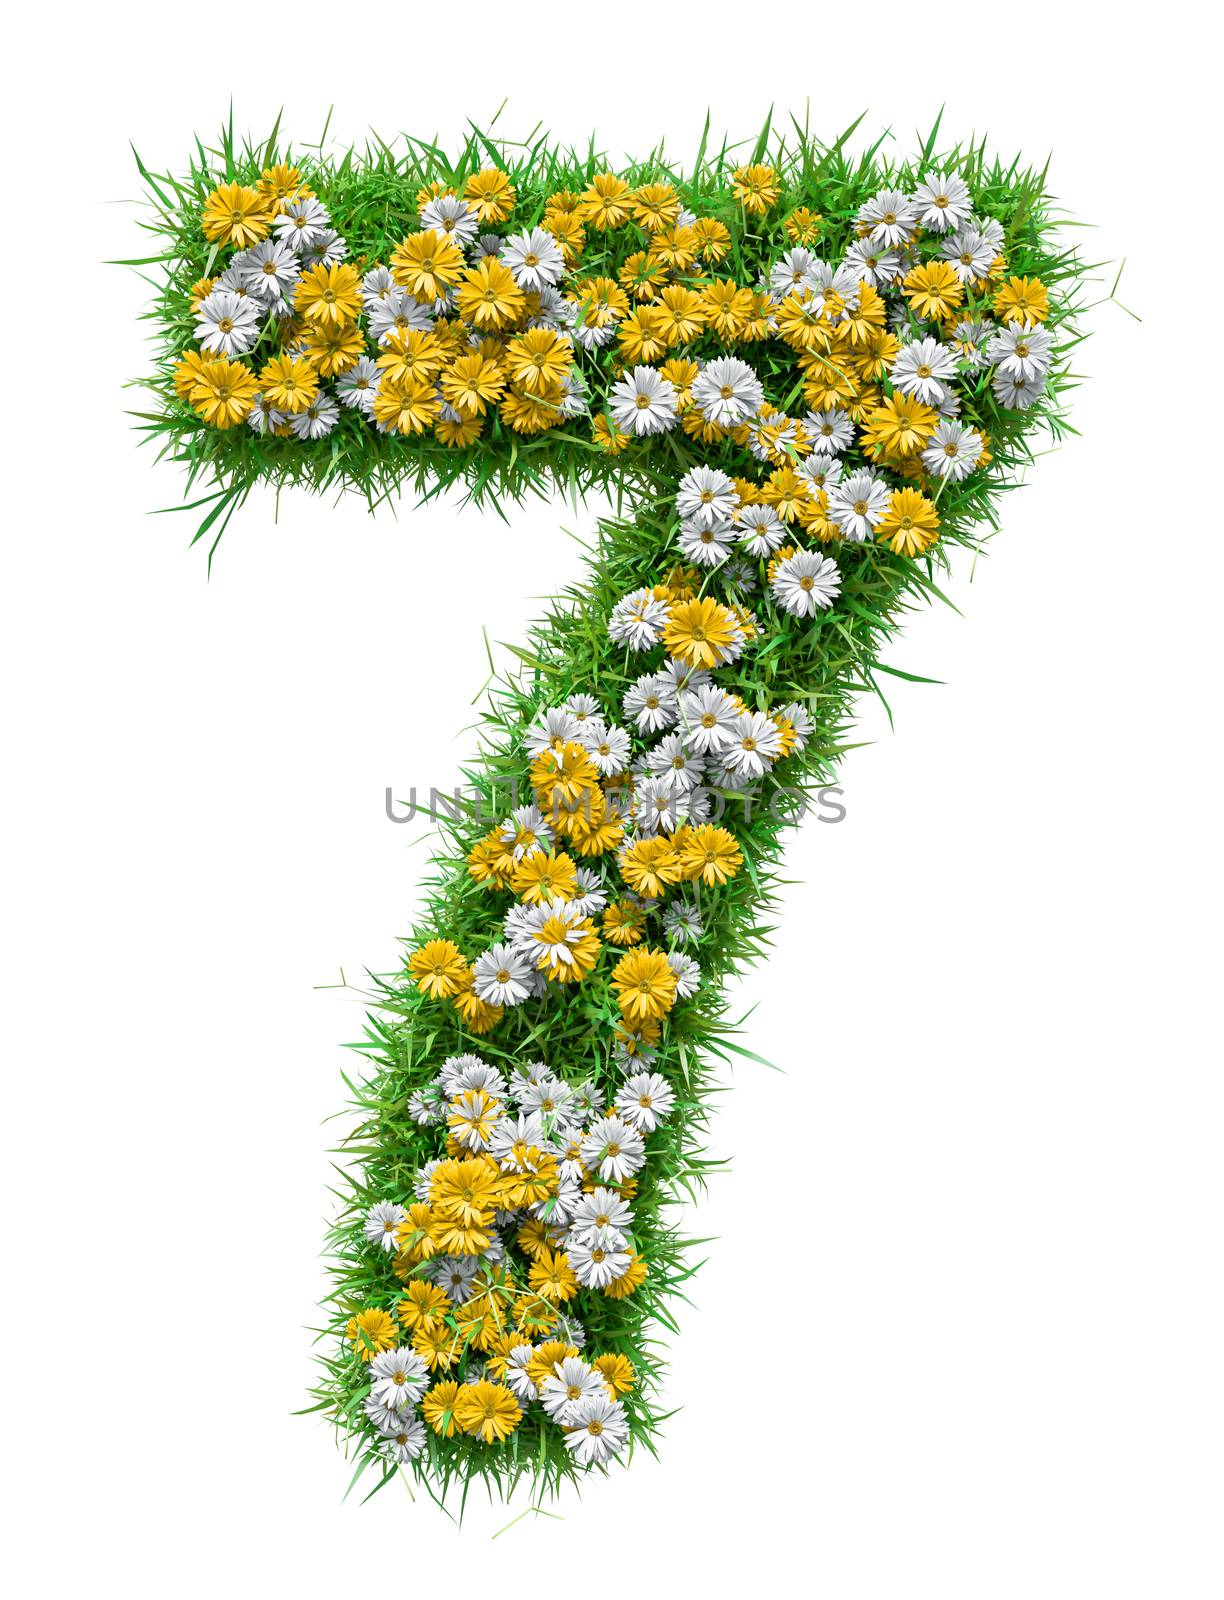 Number 7 of Green Grass And Flowers, isolated on white background. 3D illustration